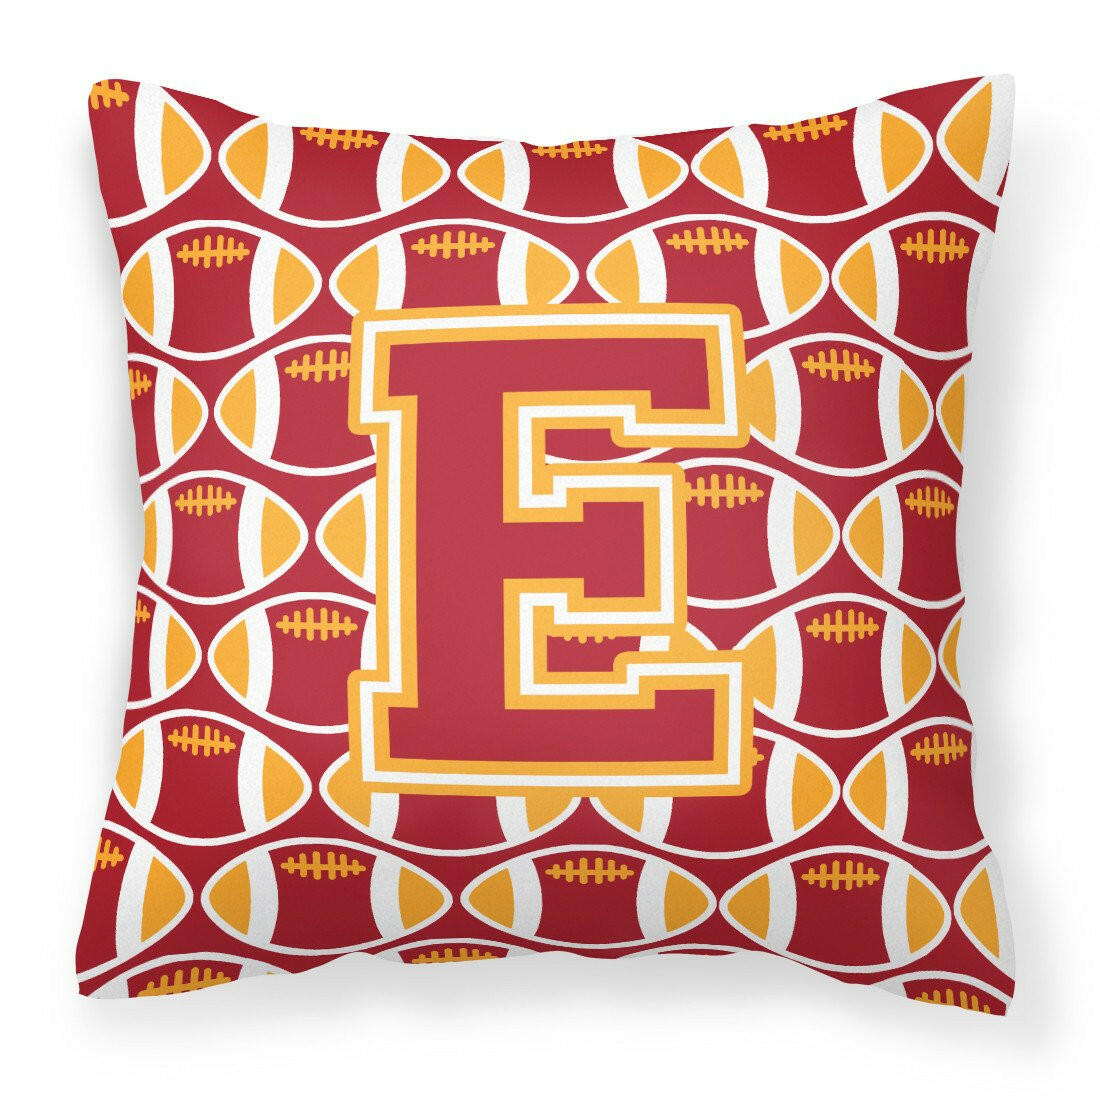 Letter E Football Cardinal and Gold Fabric Decorative Pillow CJ1070-EPW1414 by Caroline's Treasures